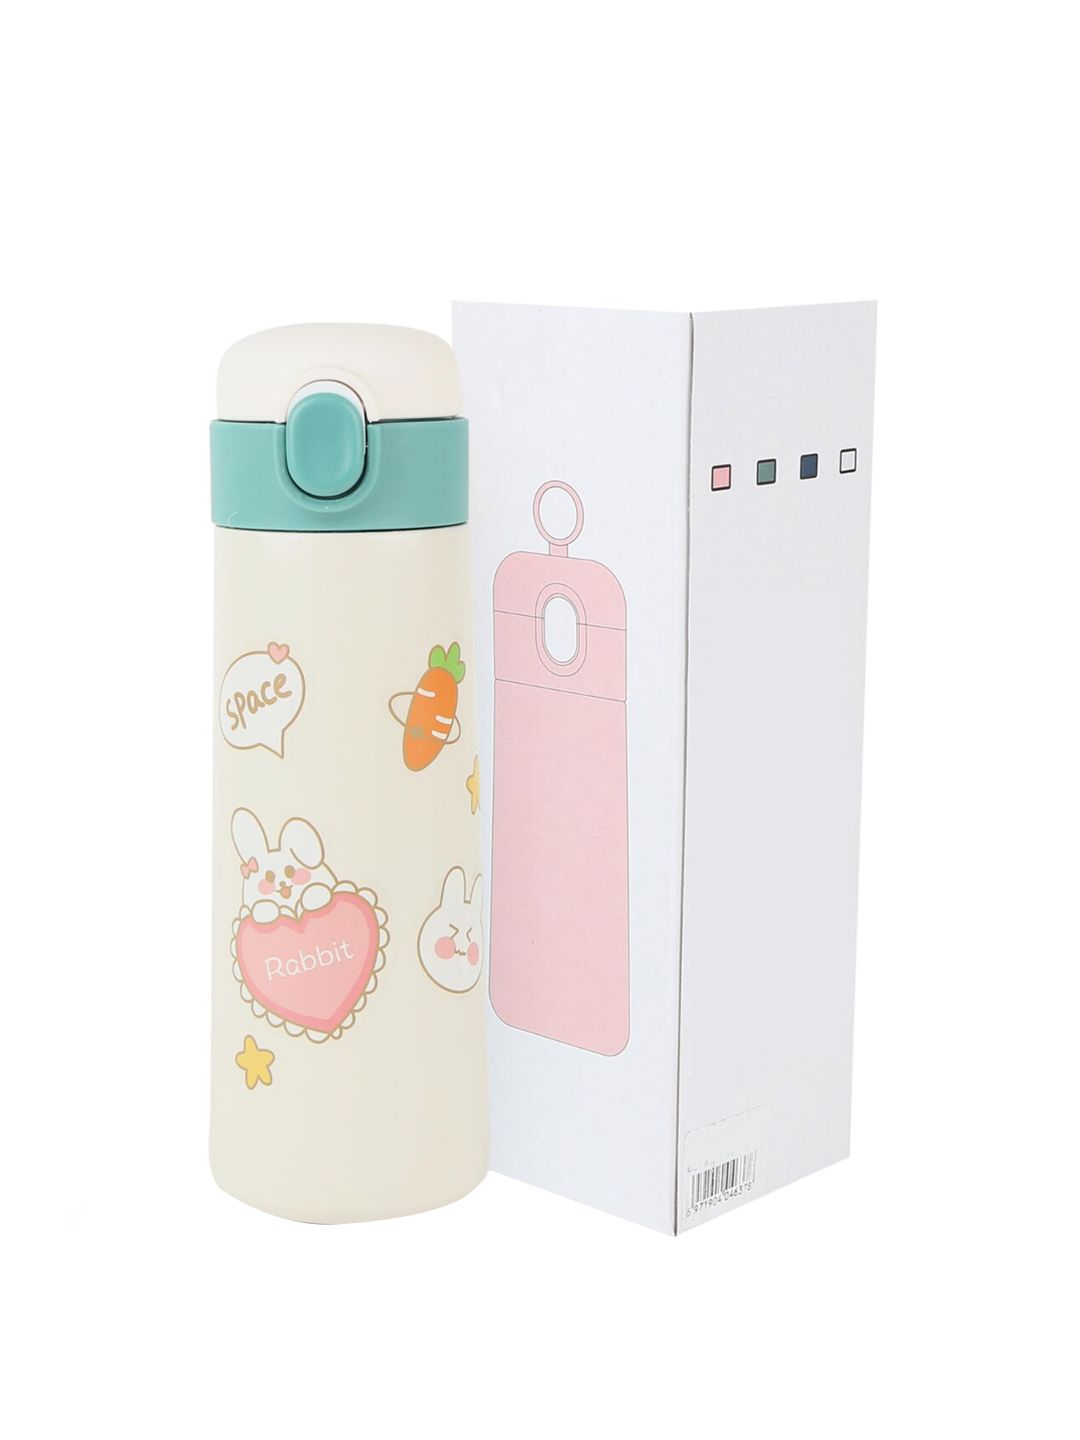 iSWEVEN Cream & Blue Printed Stainless Steel Water Bottle 450 ML Price in India